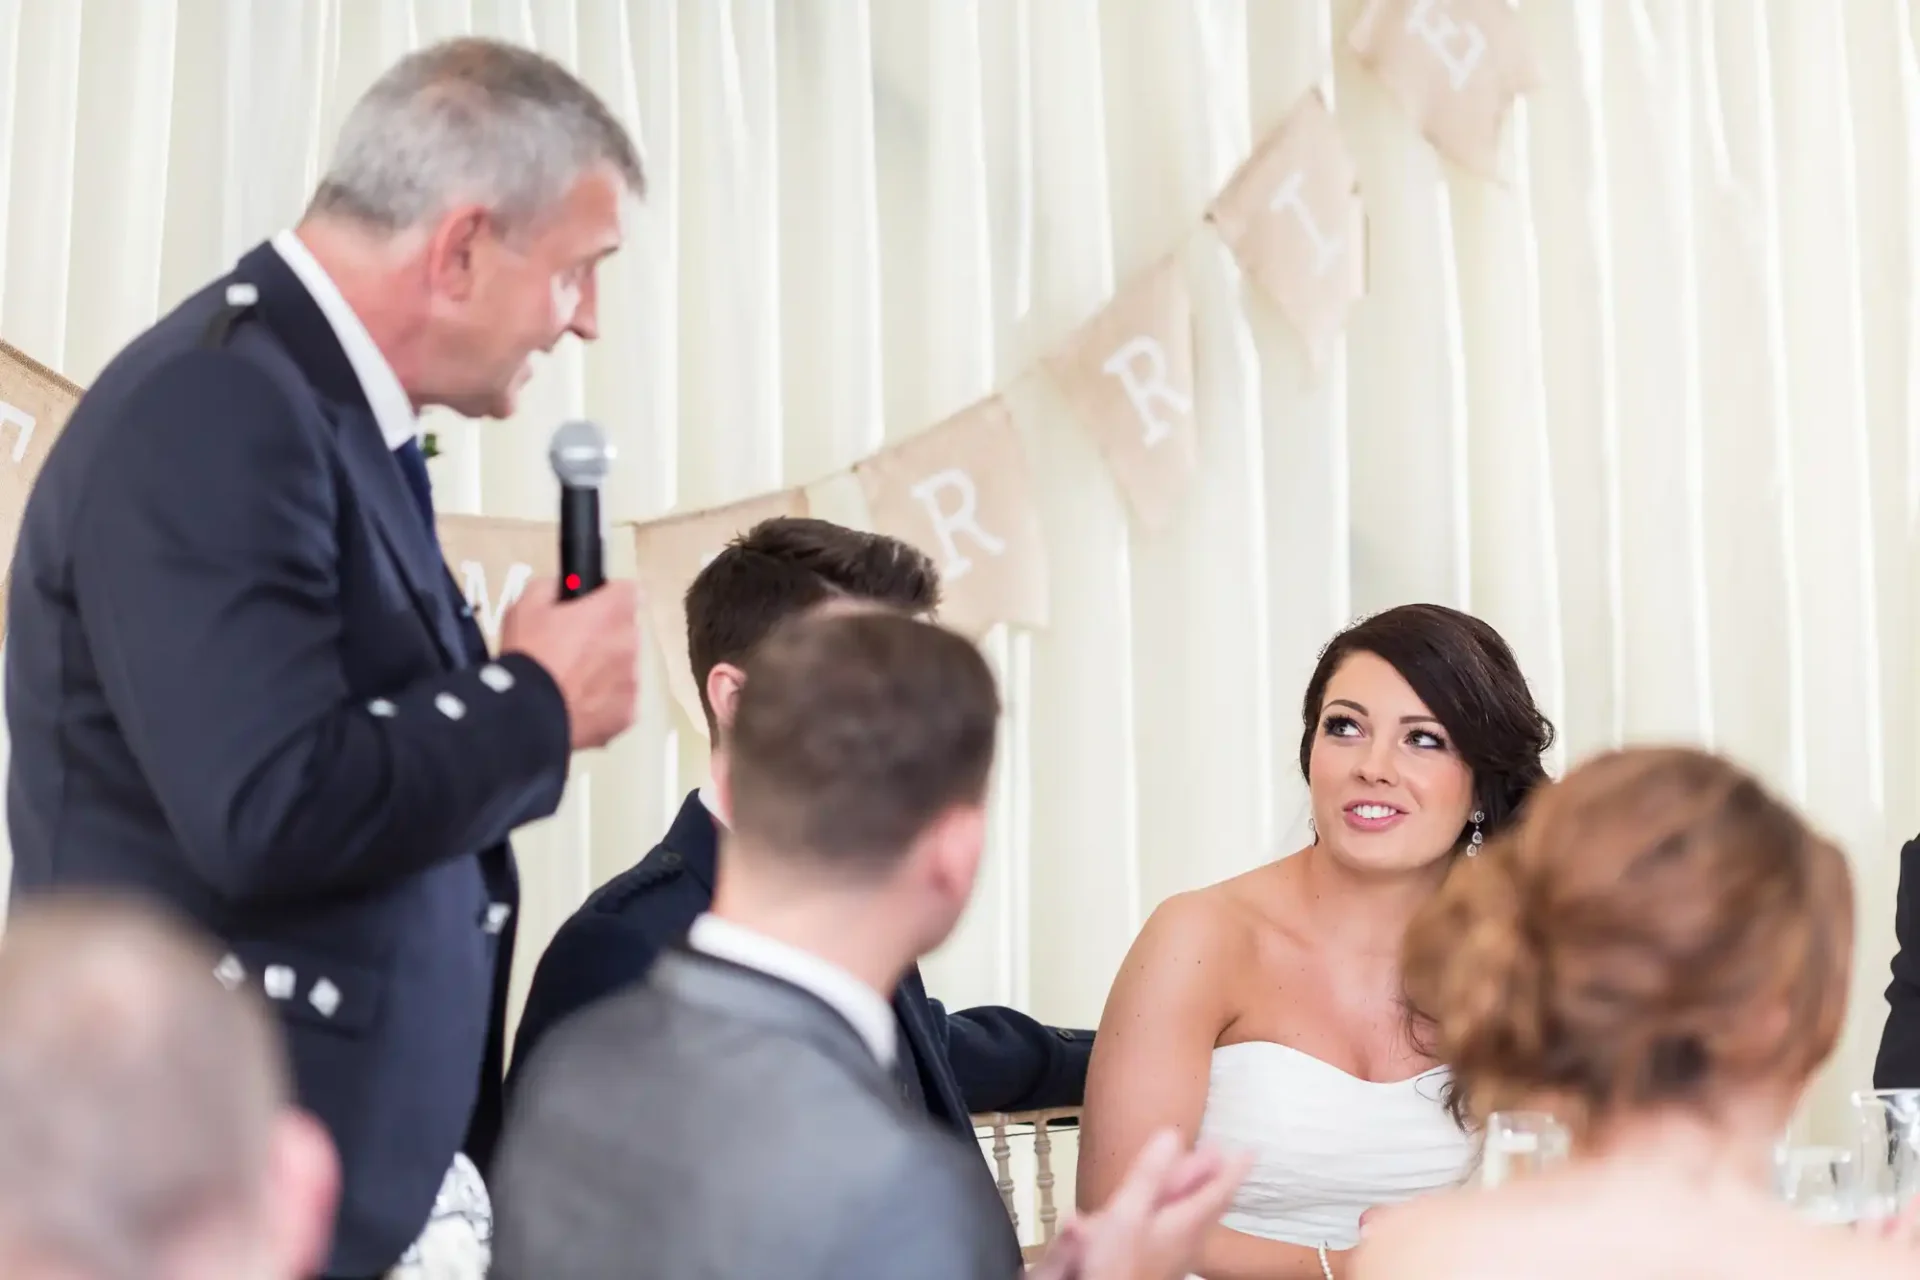 A bride attentively listening to a man giving a speech at a wedding reception, with guests seated around the table.